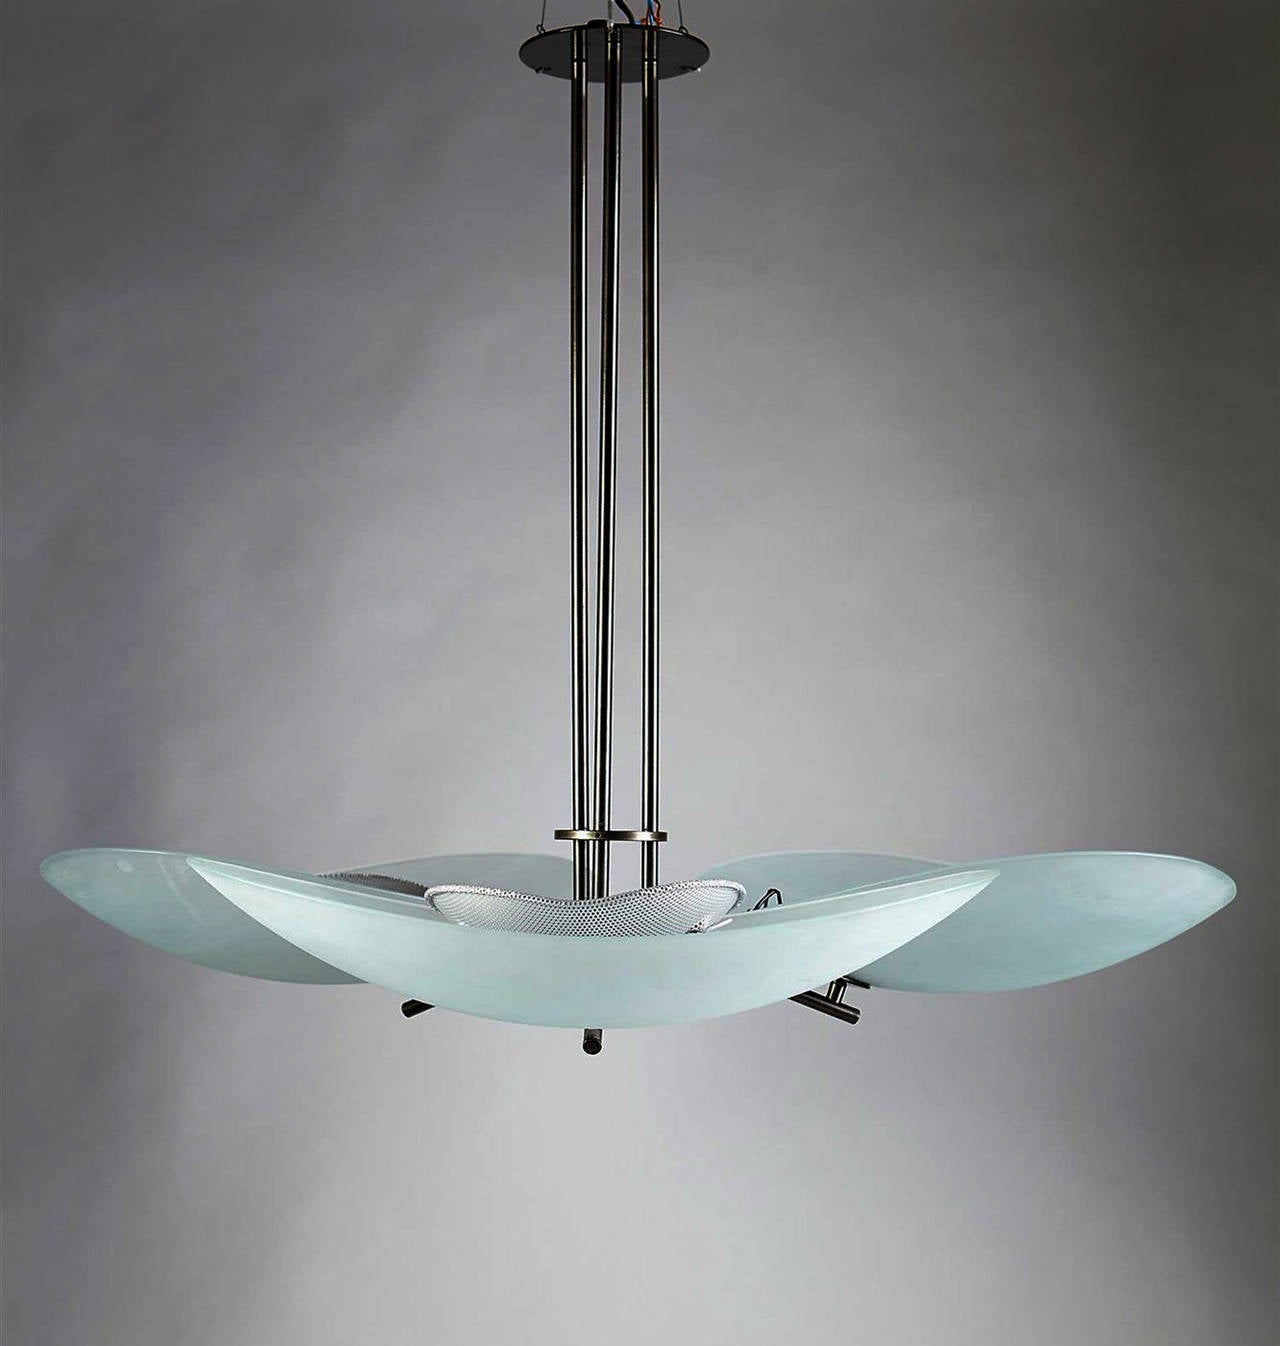 Lacquered steel and matt glass. Designed by Ernesto Gismondi for Artemide in the early 1980s.
Measures: H 79 cm/ 31''
D 90 cm/ 35 1/2''
Two pieces available.